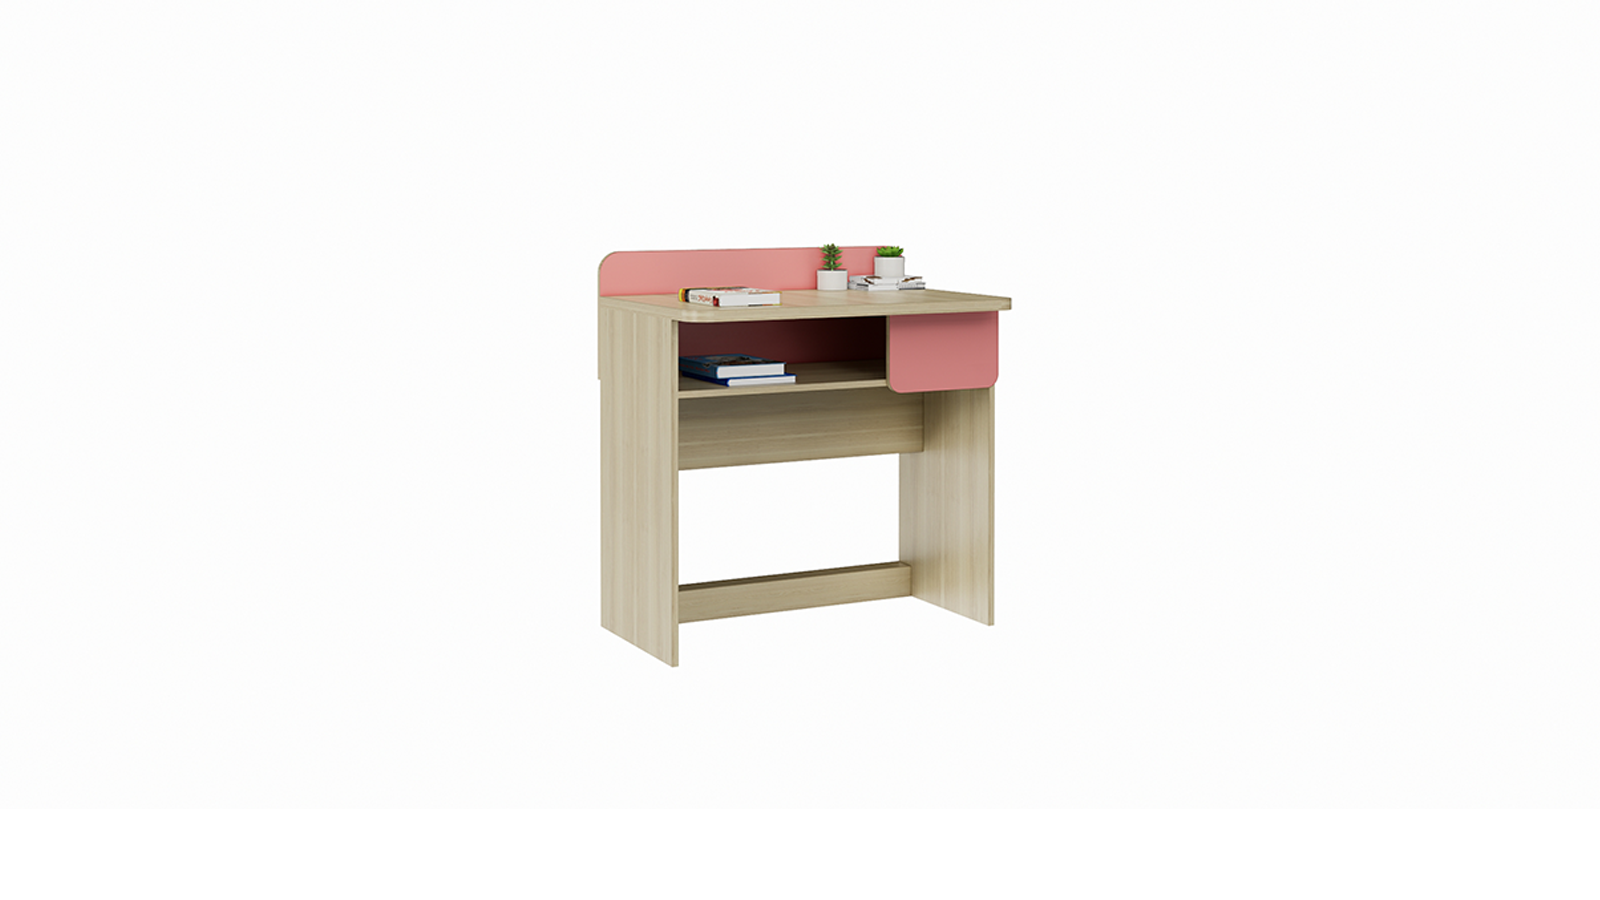 Pomelo Working Table